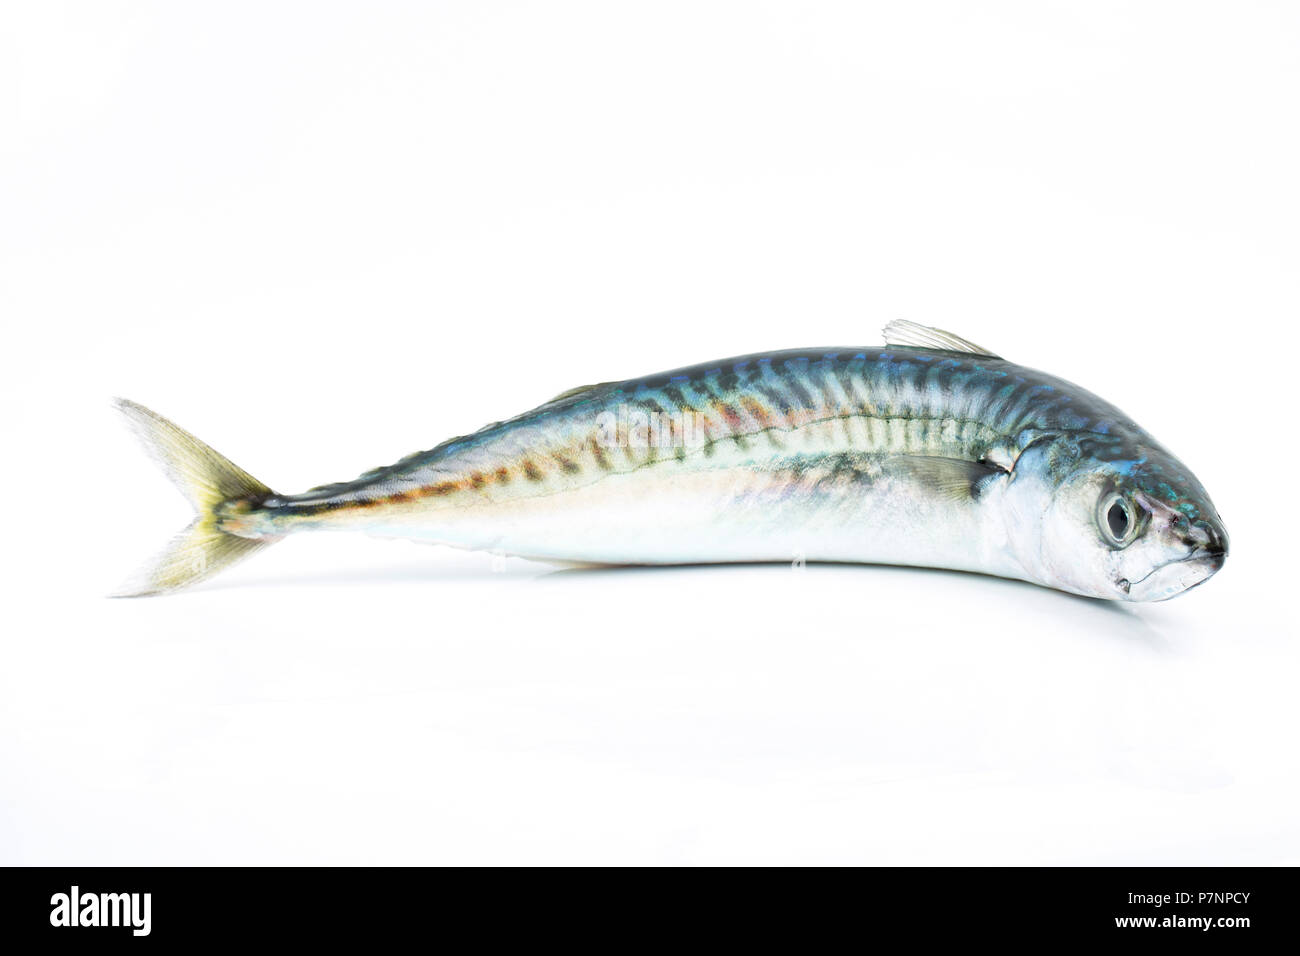 A single raw mackerel, Scomber scombrus, caught on rod and line in the English Channel. Mackerel are a source of Omega 3 fish oils. They can be caught Stock Photo